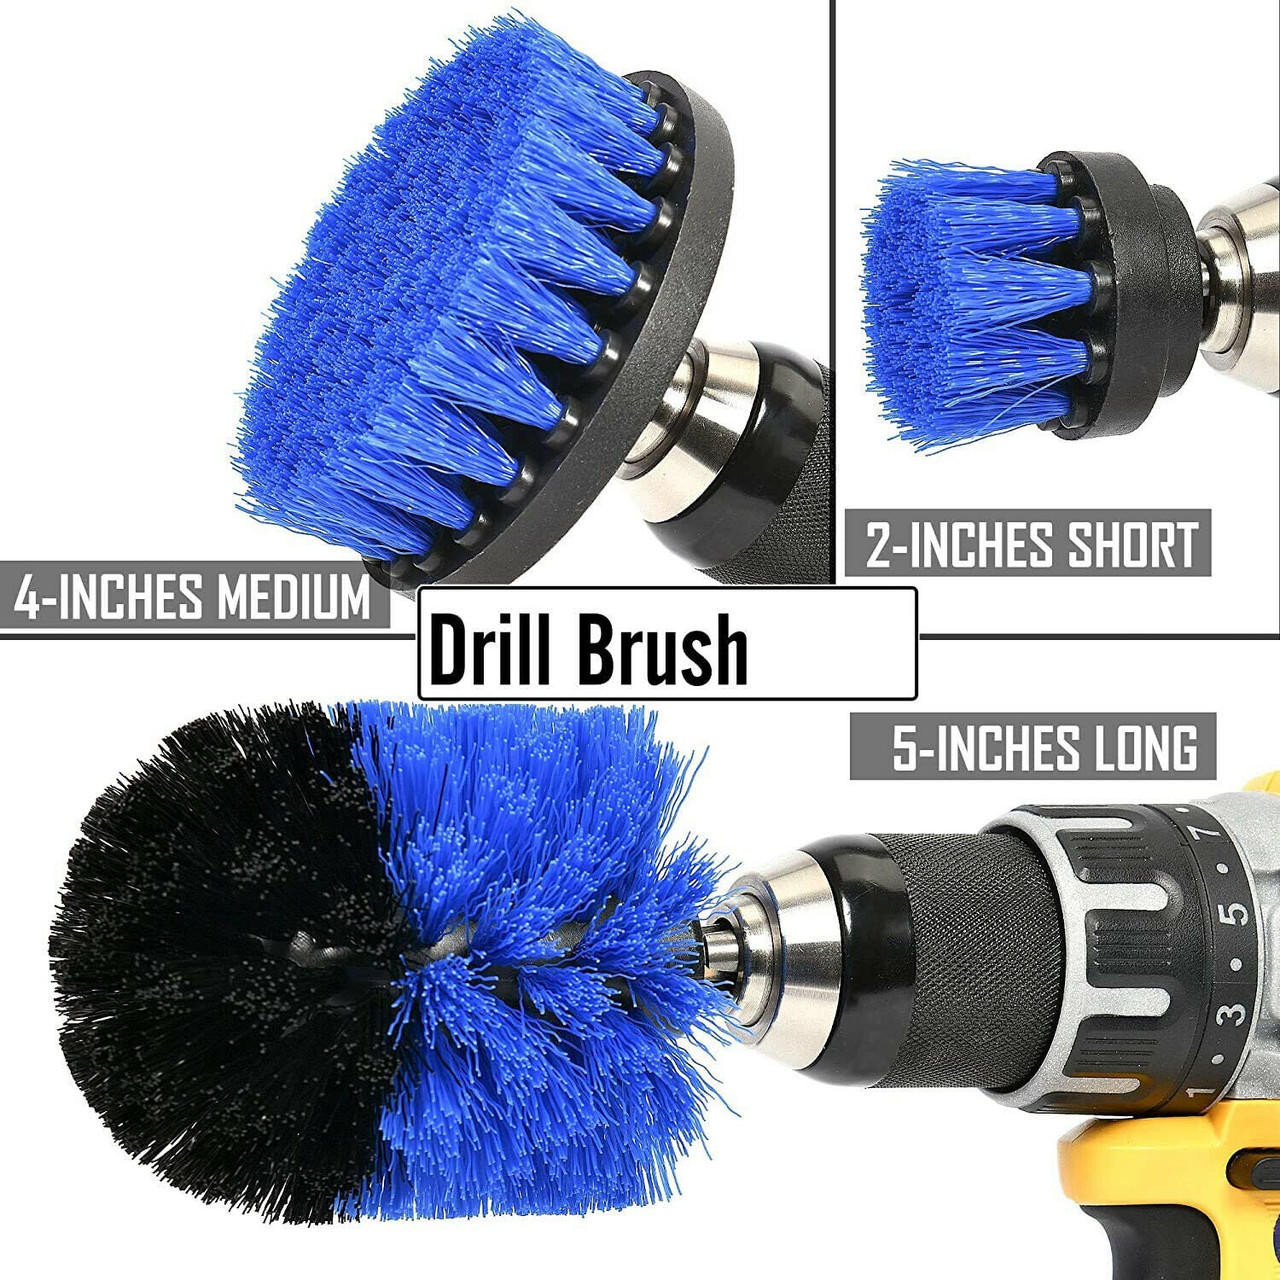 https://cdn11.bigcommerce.com/s-zrh8tkpr8d/images/stencil/1280x1280/products/9924/34748/drill-brushes-set-3pcs-tile-grout-power-scrubber-cleaner-spin-tub-shower-wall__55371.1666696769.jpg?c=2&imbypass=on